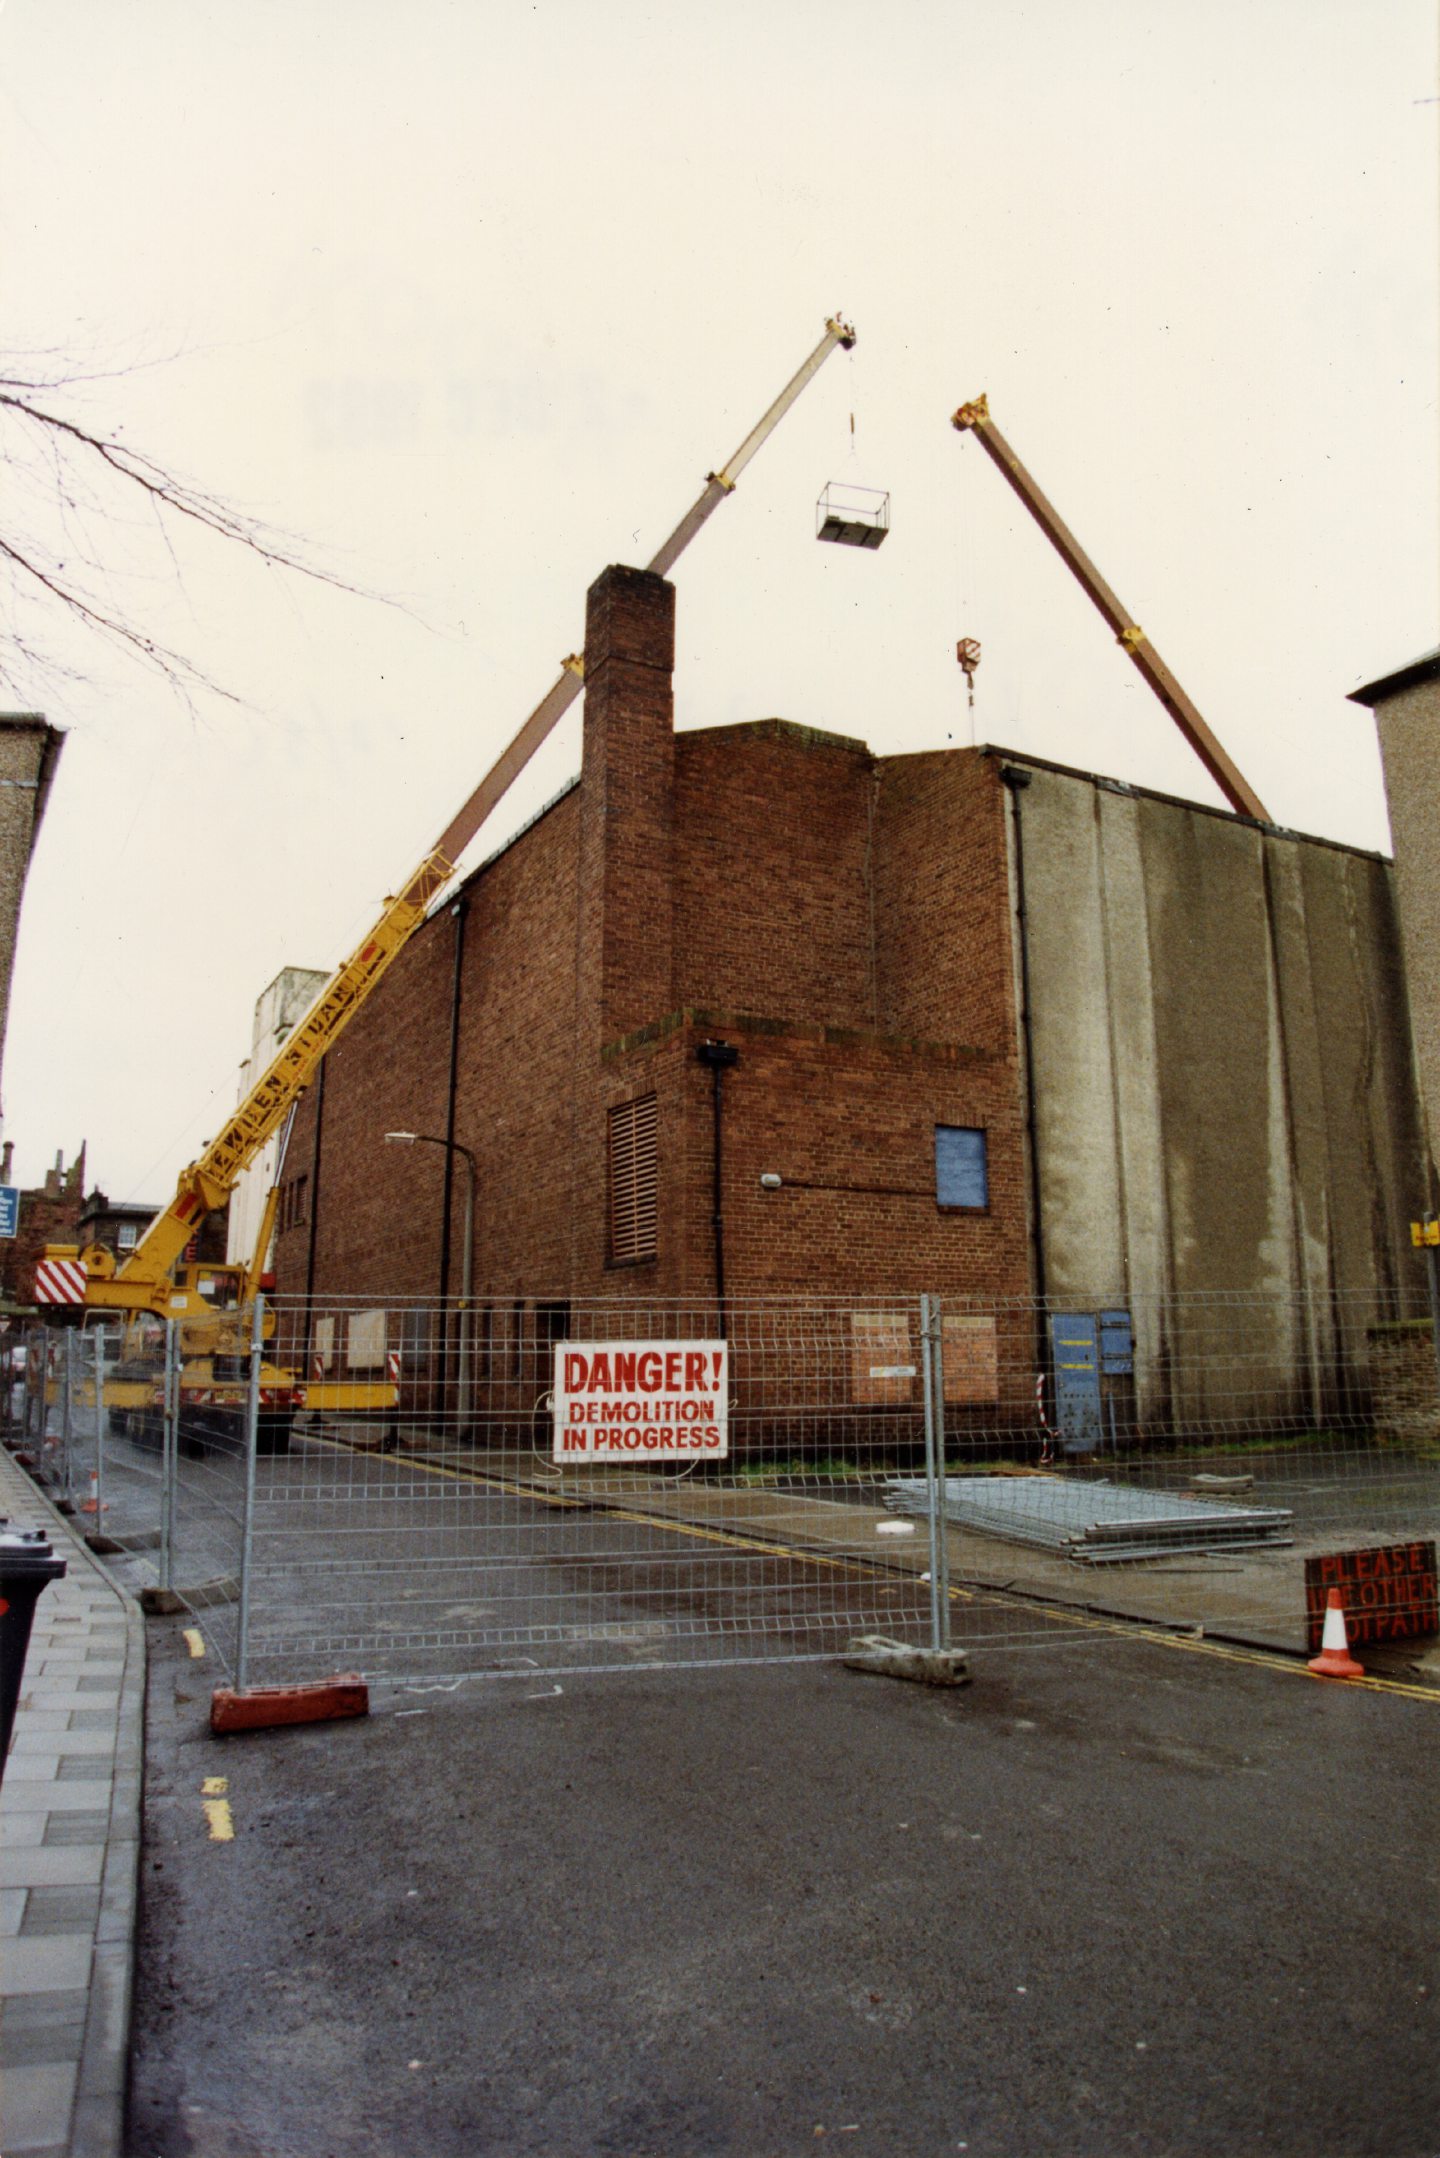 Demolition works are to begin with vehicles on site on December 2 1992.